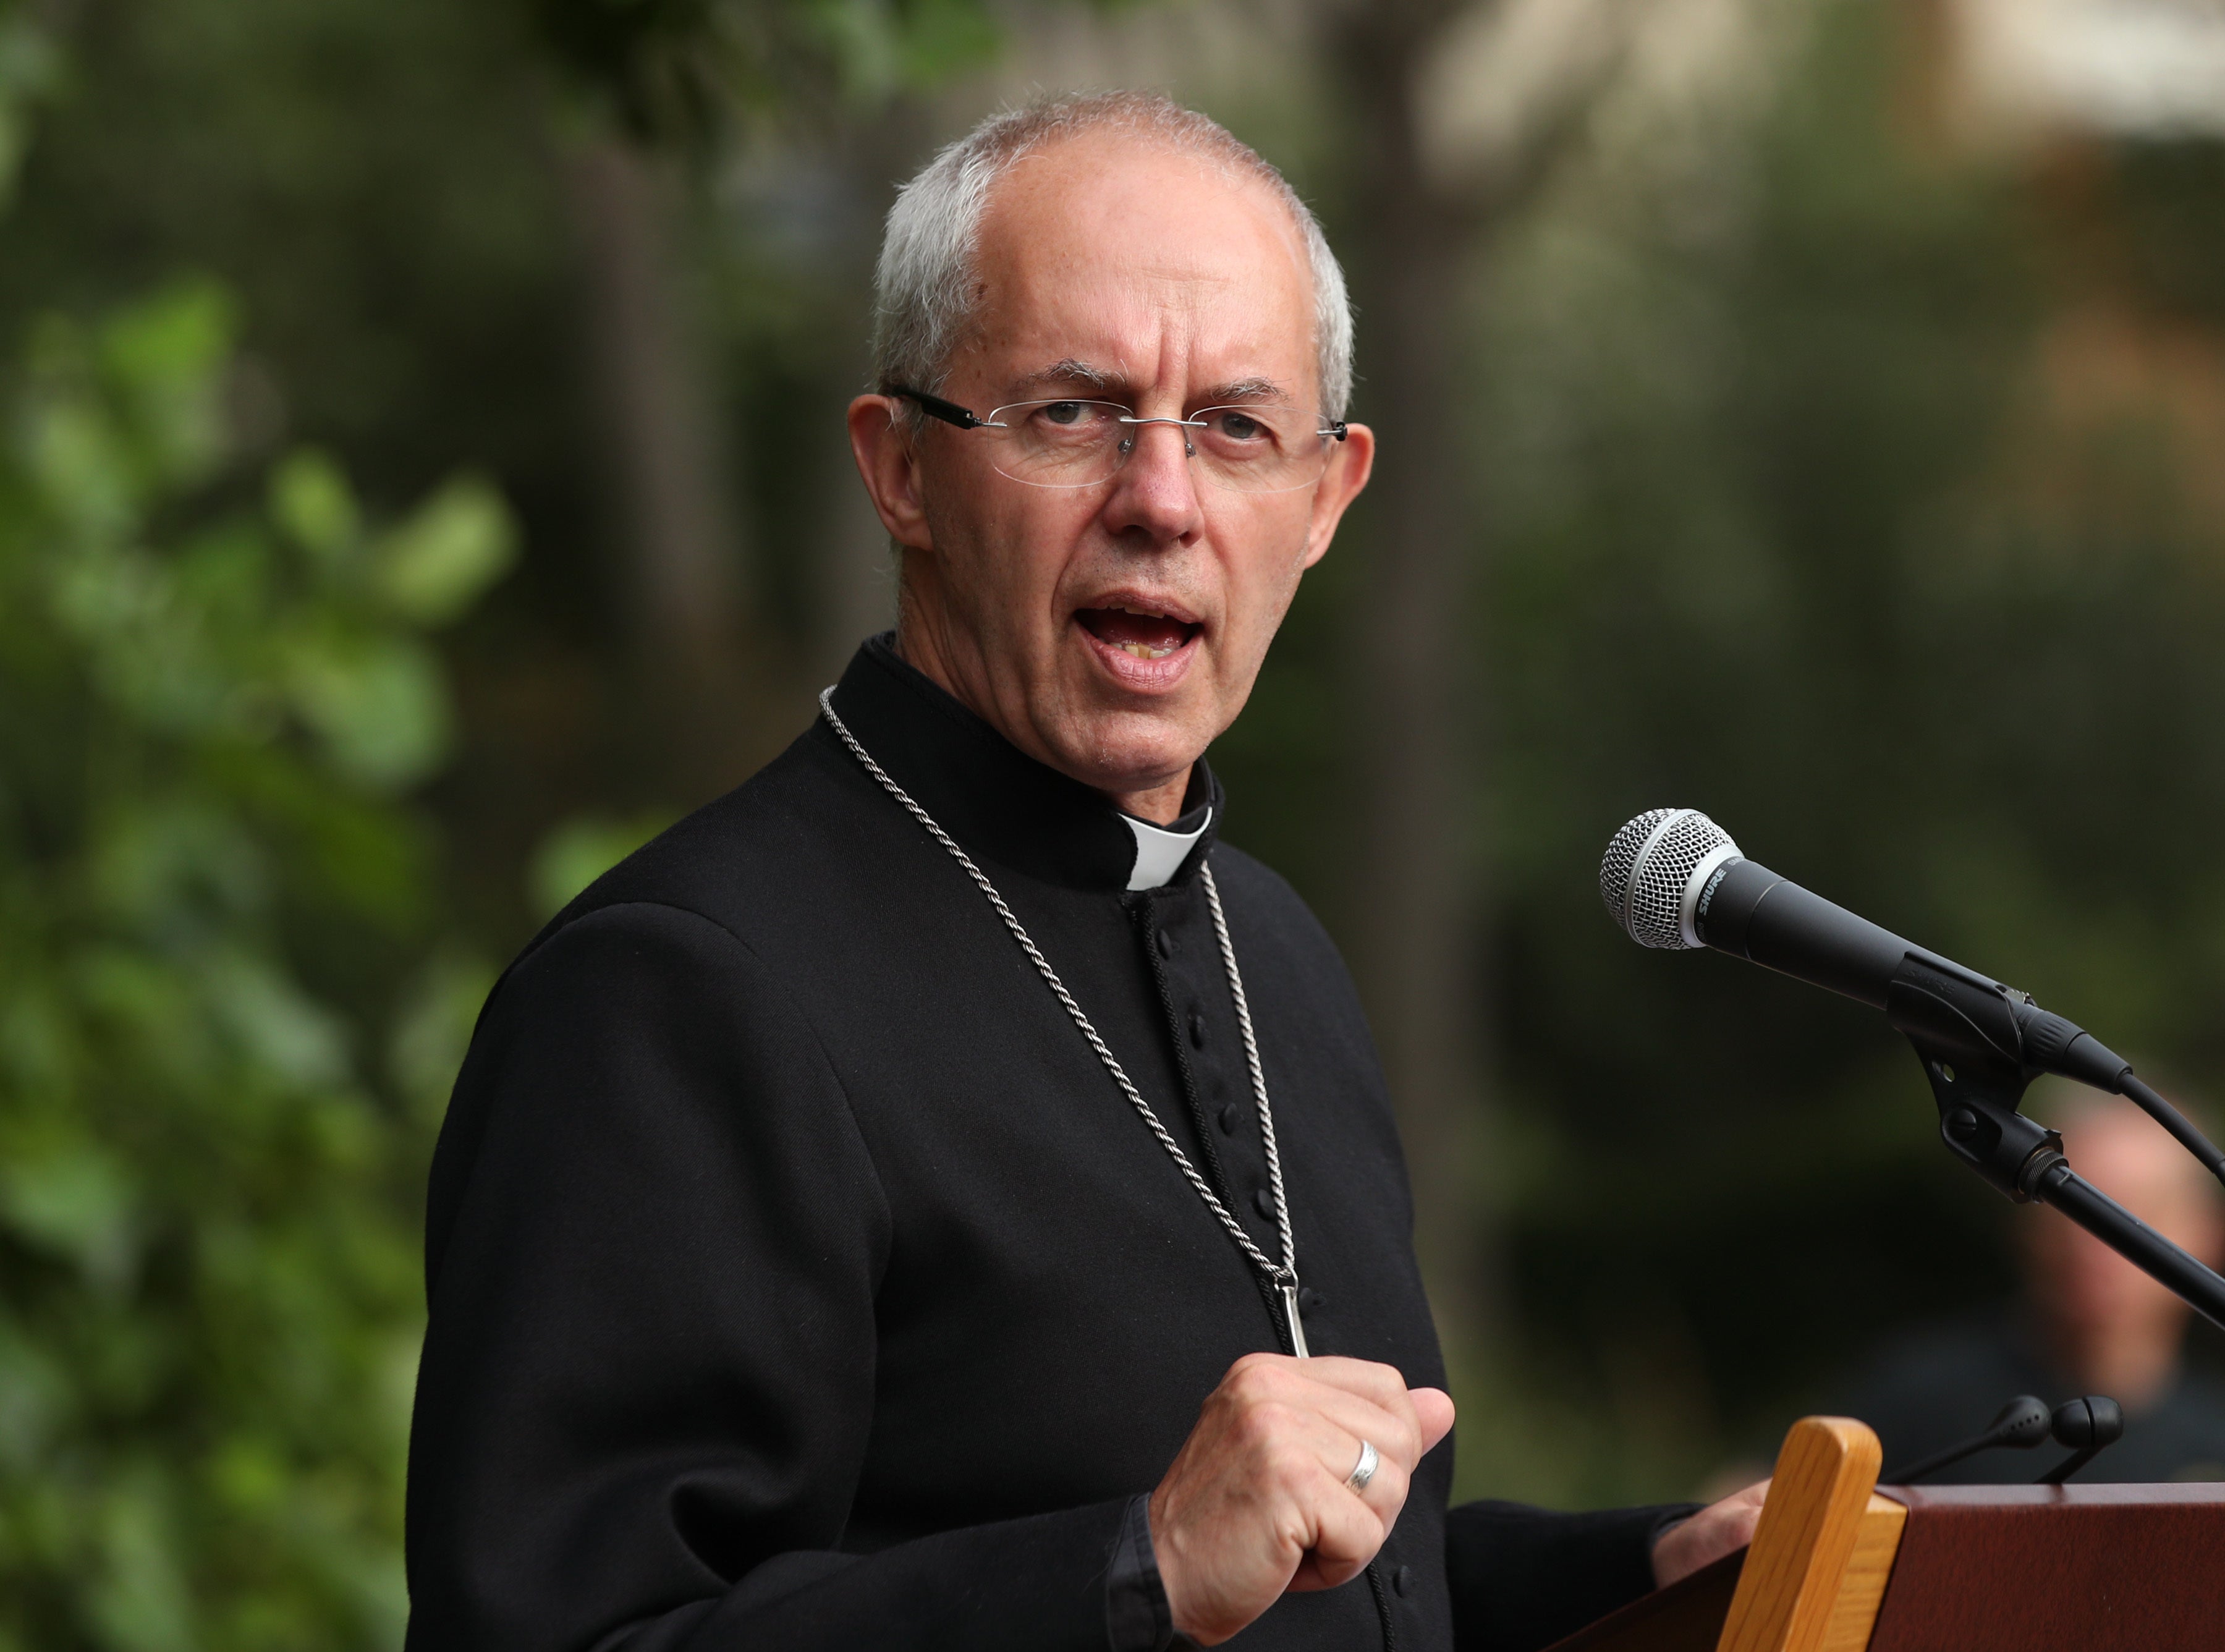 Multiple other Anglican bishops have also seek to reaffirm the 1998 declaration